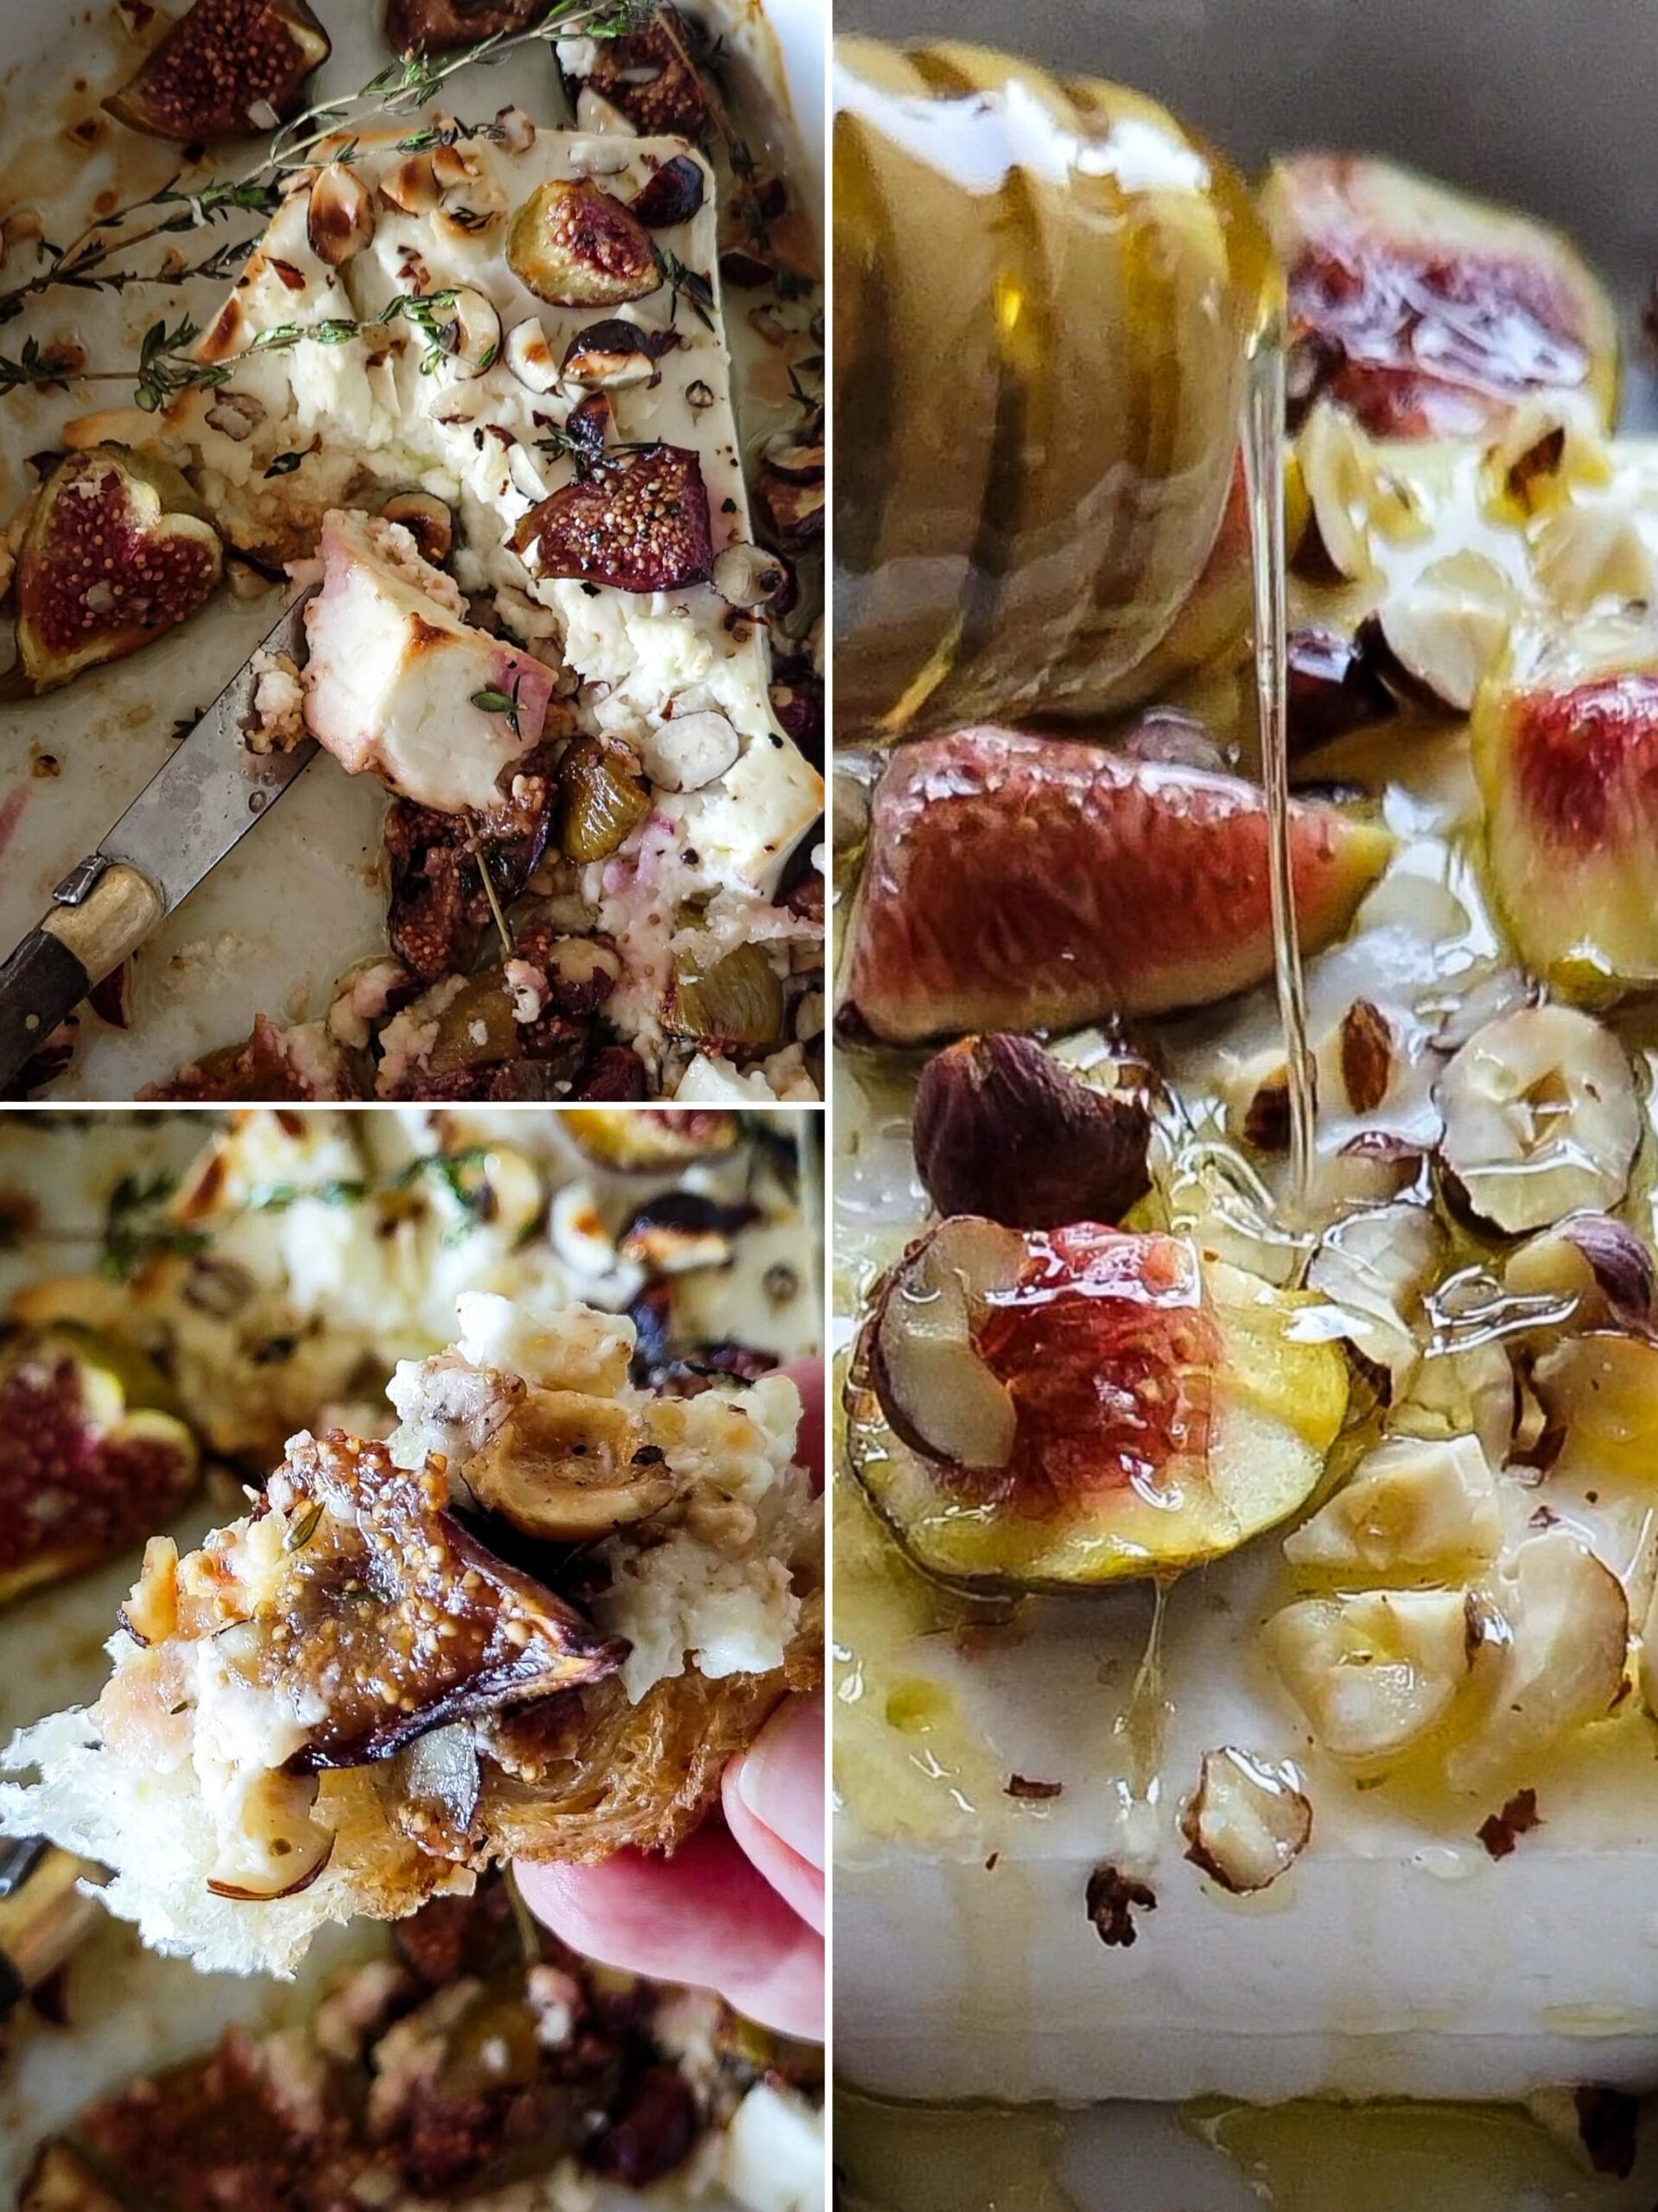 Collage showing the finished Baked Feta with Hazelnuts and Figs, with extra honey being drizzled on top, as well as a crostini spread with the mixture.